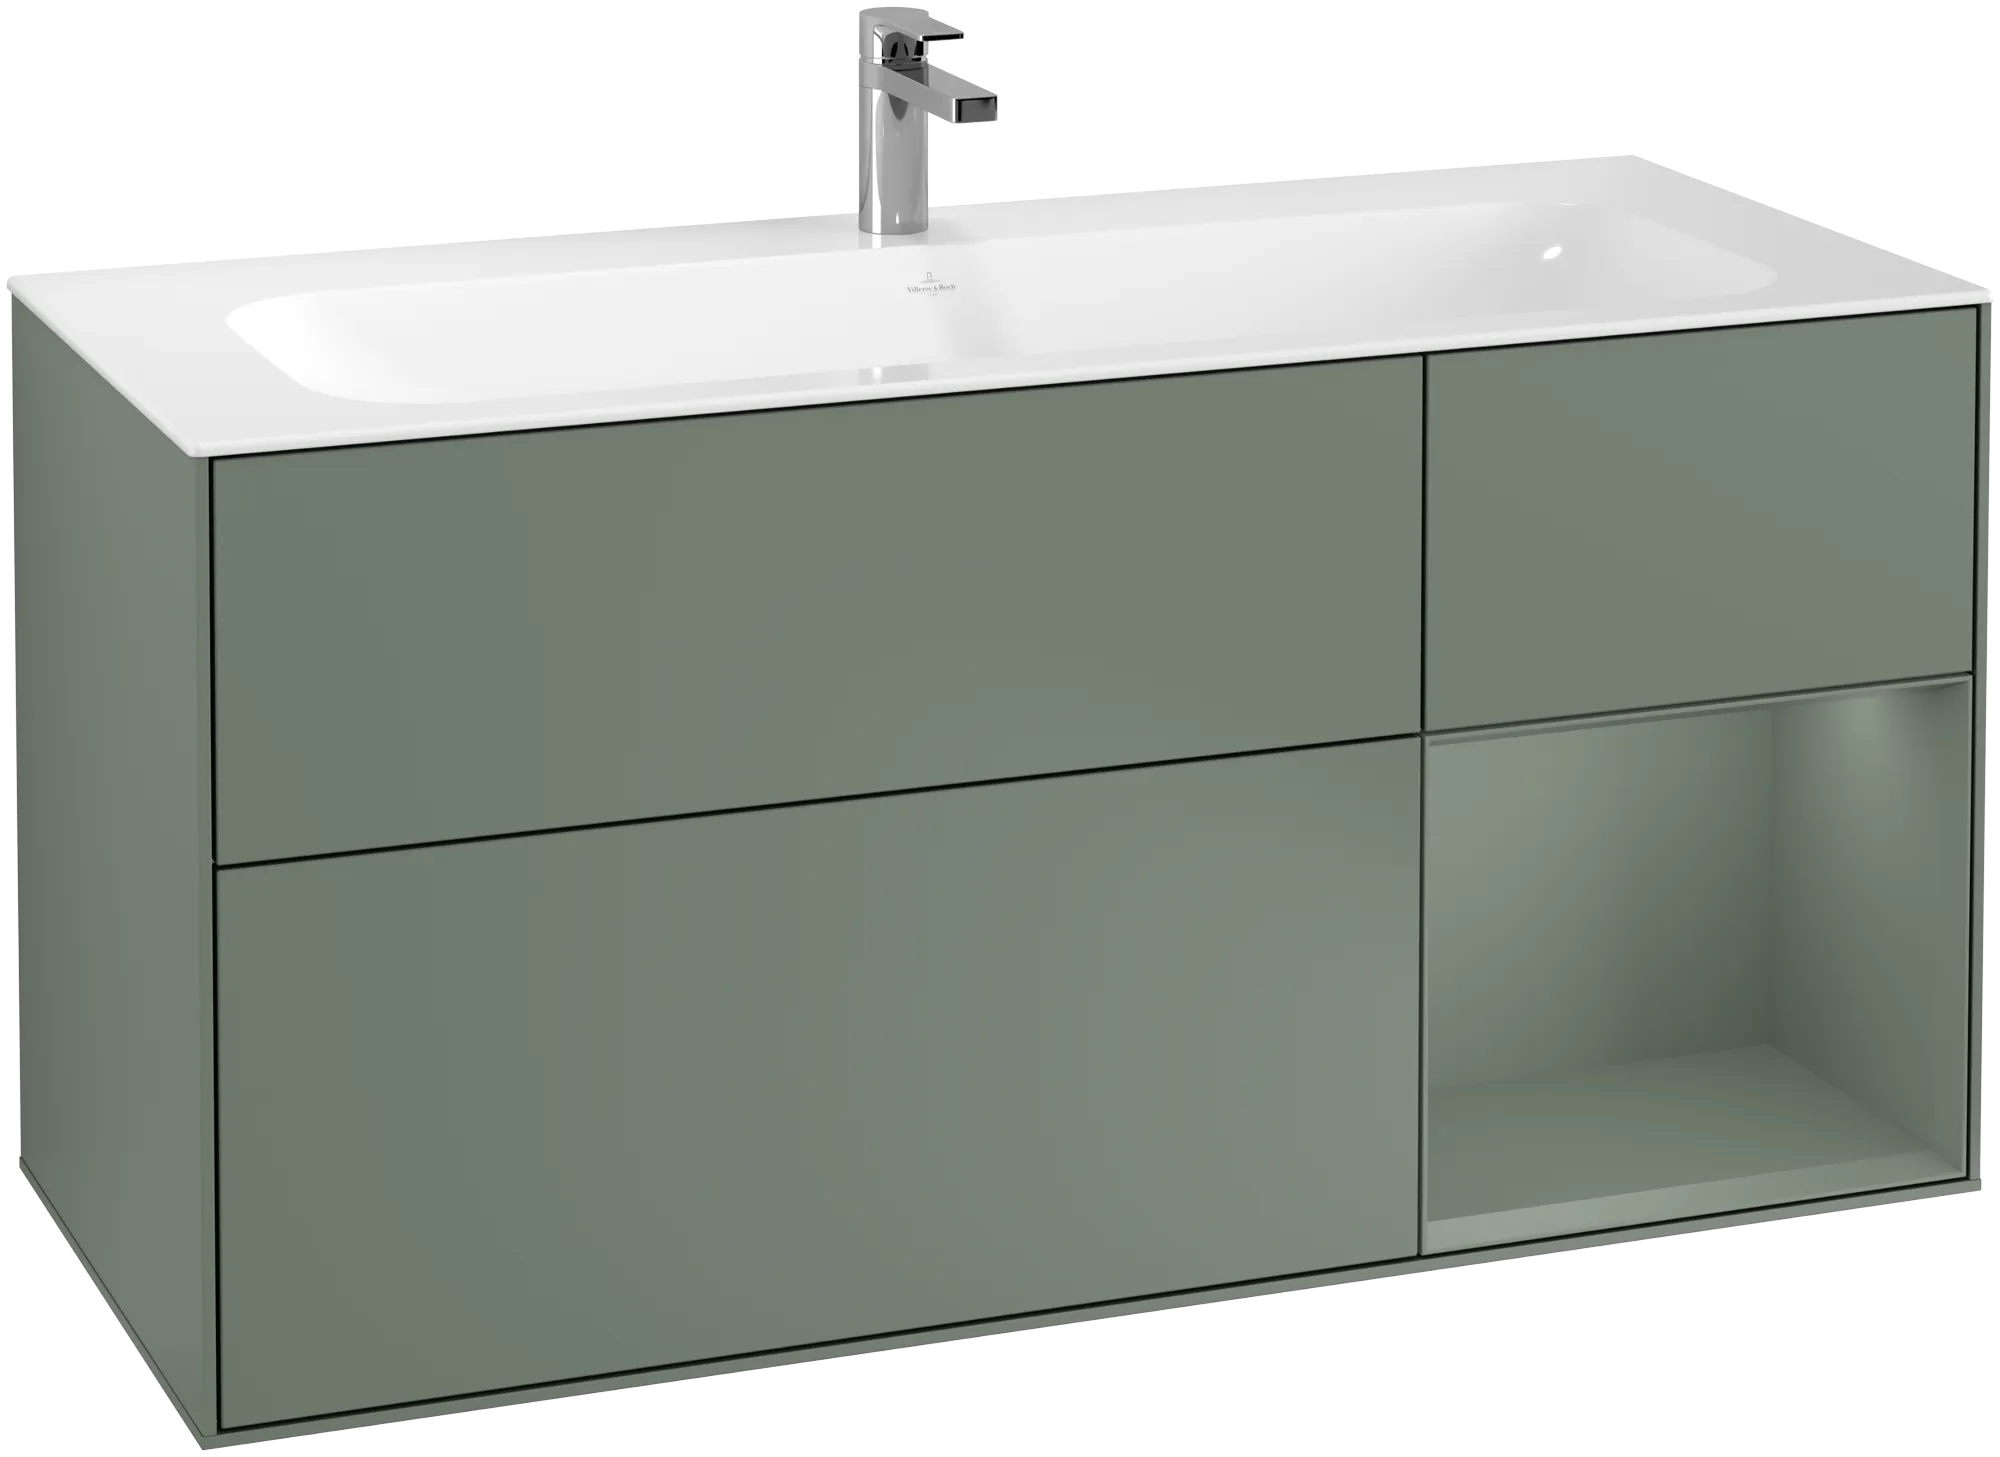 Зображення з  VILLEROY BOCH Finion Vanity unit, with lighting, 3 pull-out compartments, 1196 x 591 x 498 mm, Olive Matt Lacquer / Olive Matt Lacquer #G070GMGM